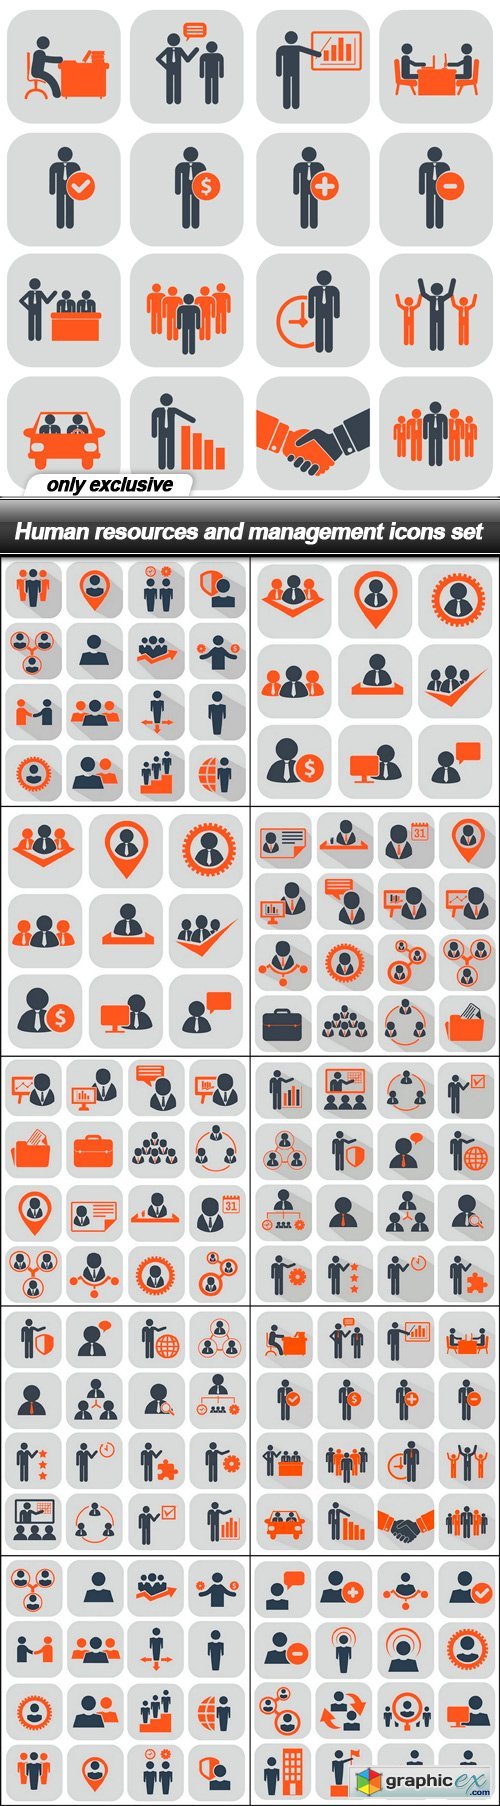 Human resources and management icons set - 11 EPS